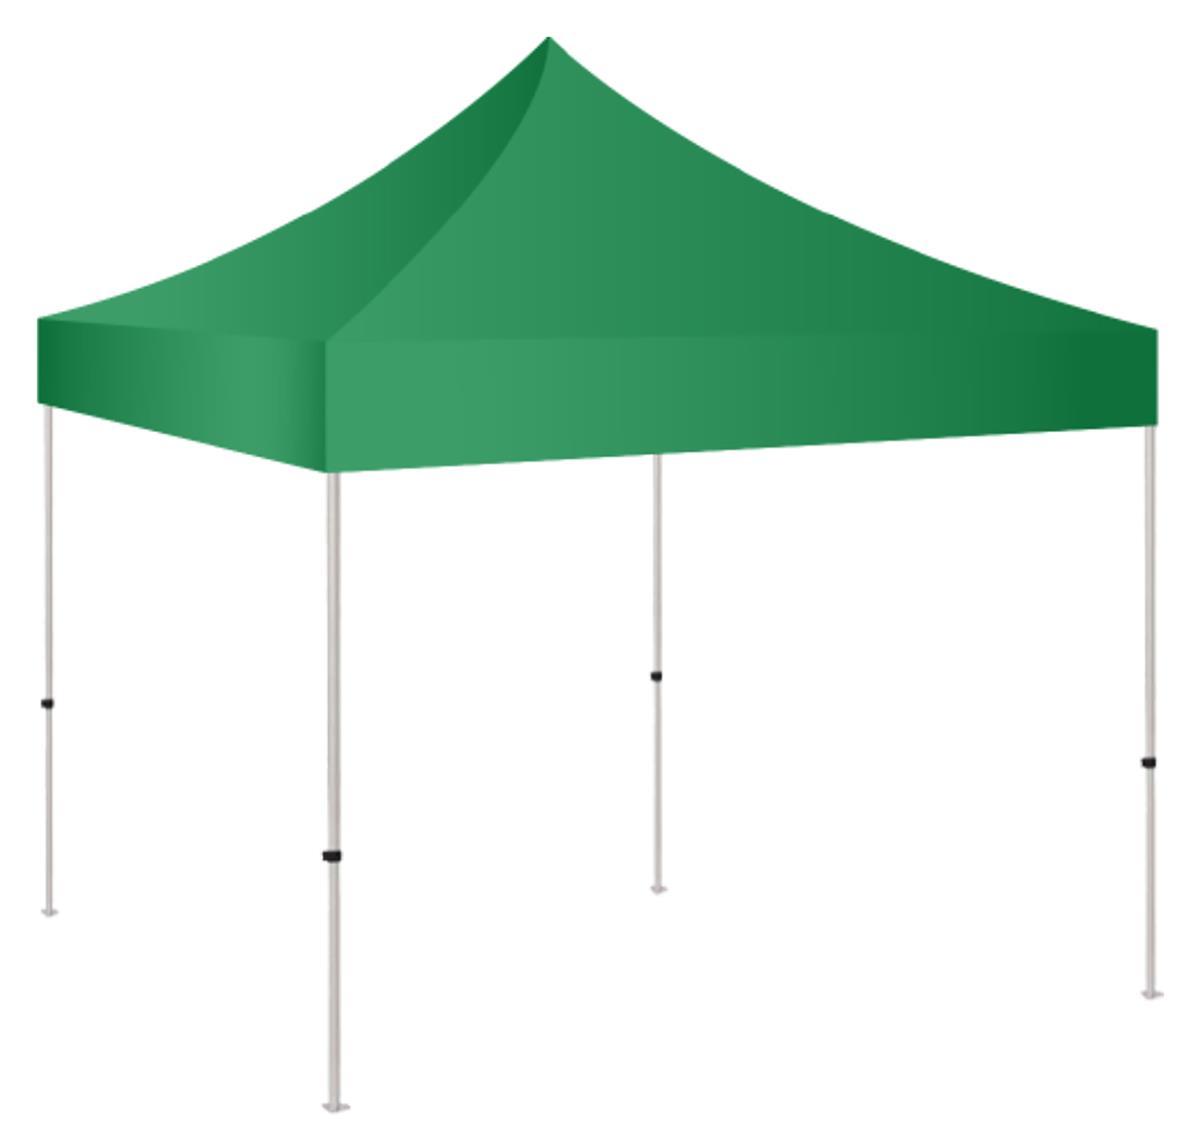 5x5 pop up canopy with hydrostatic pressure test certification 